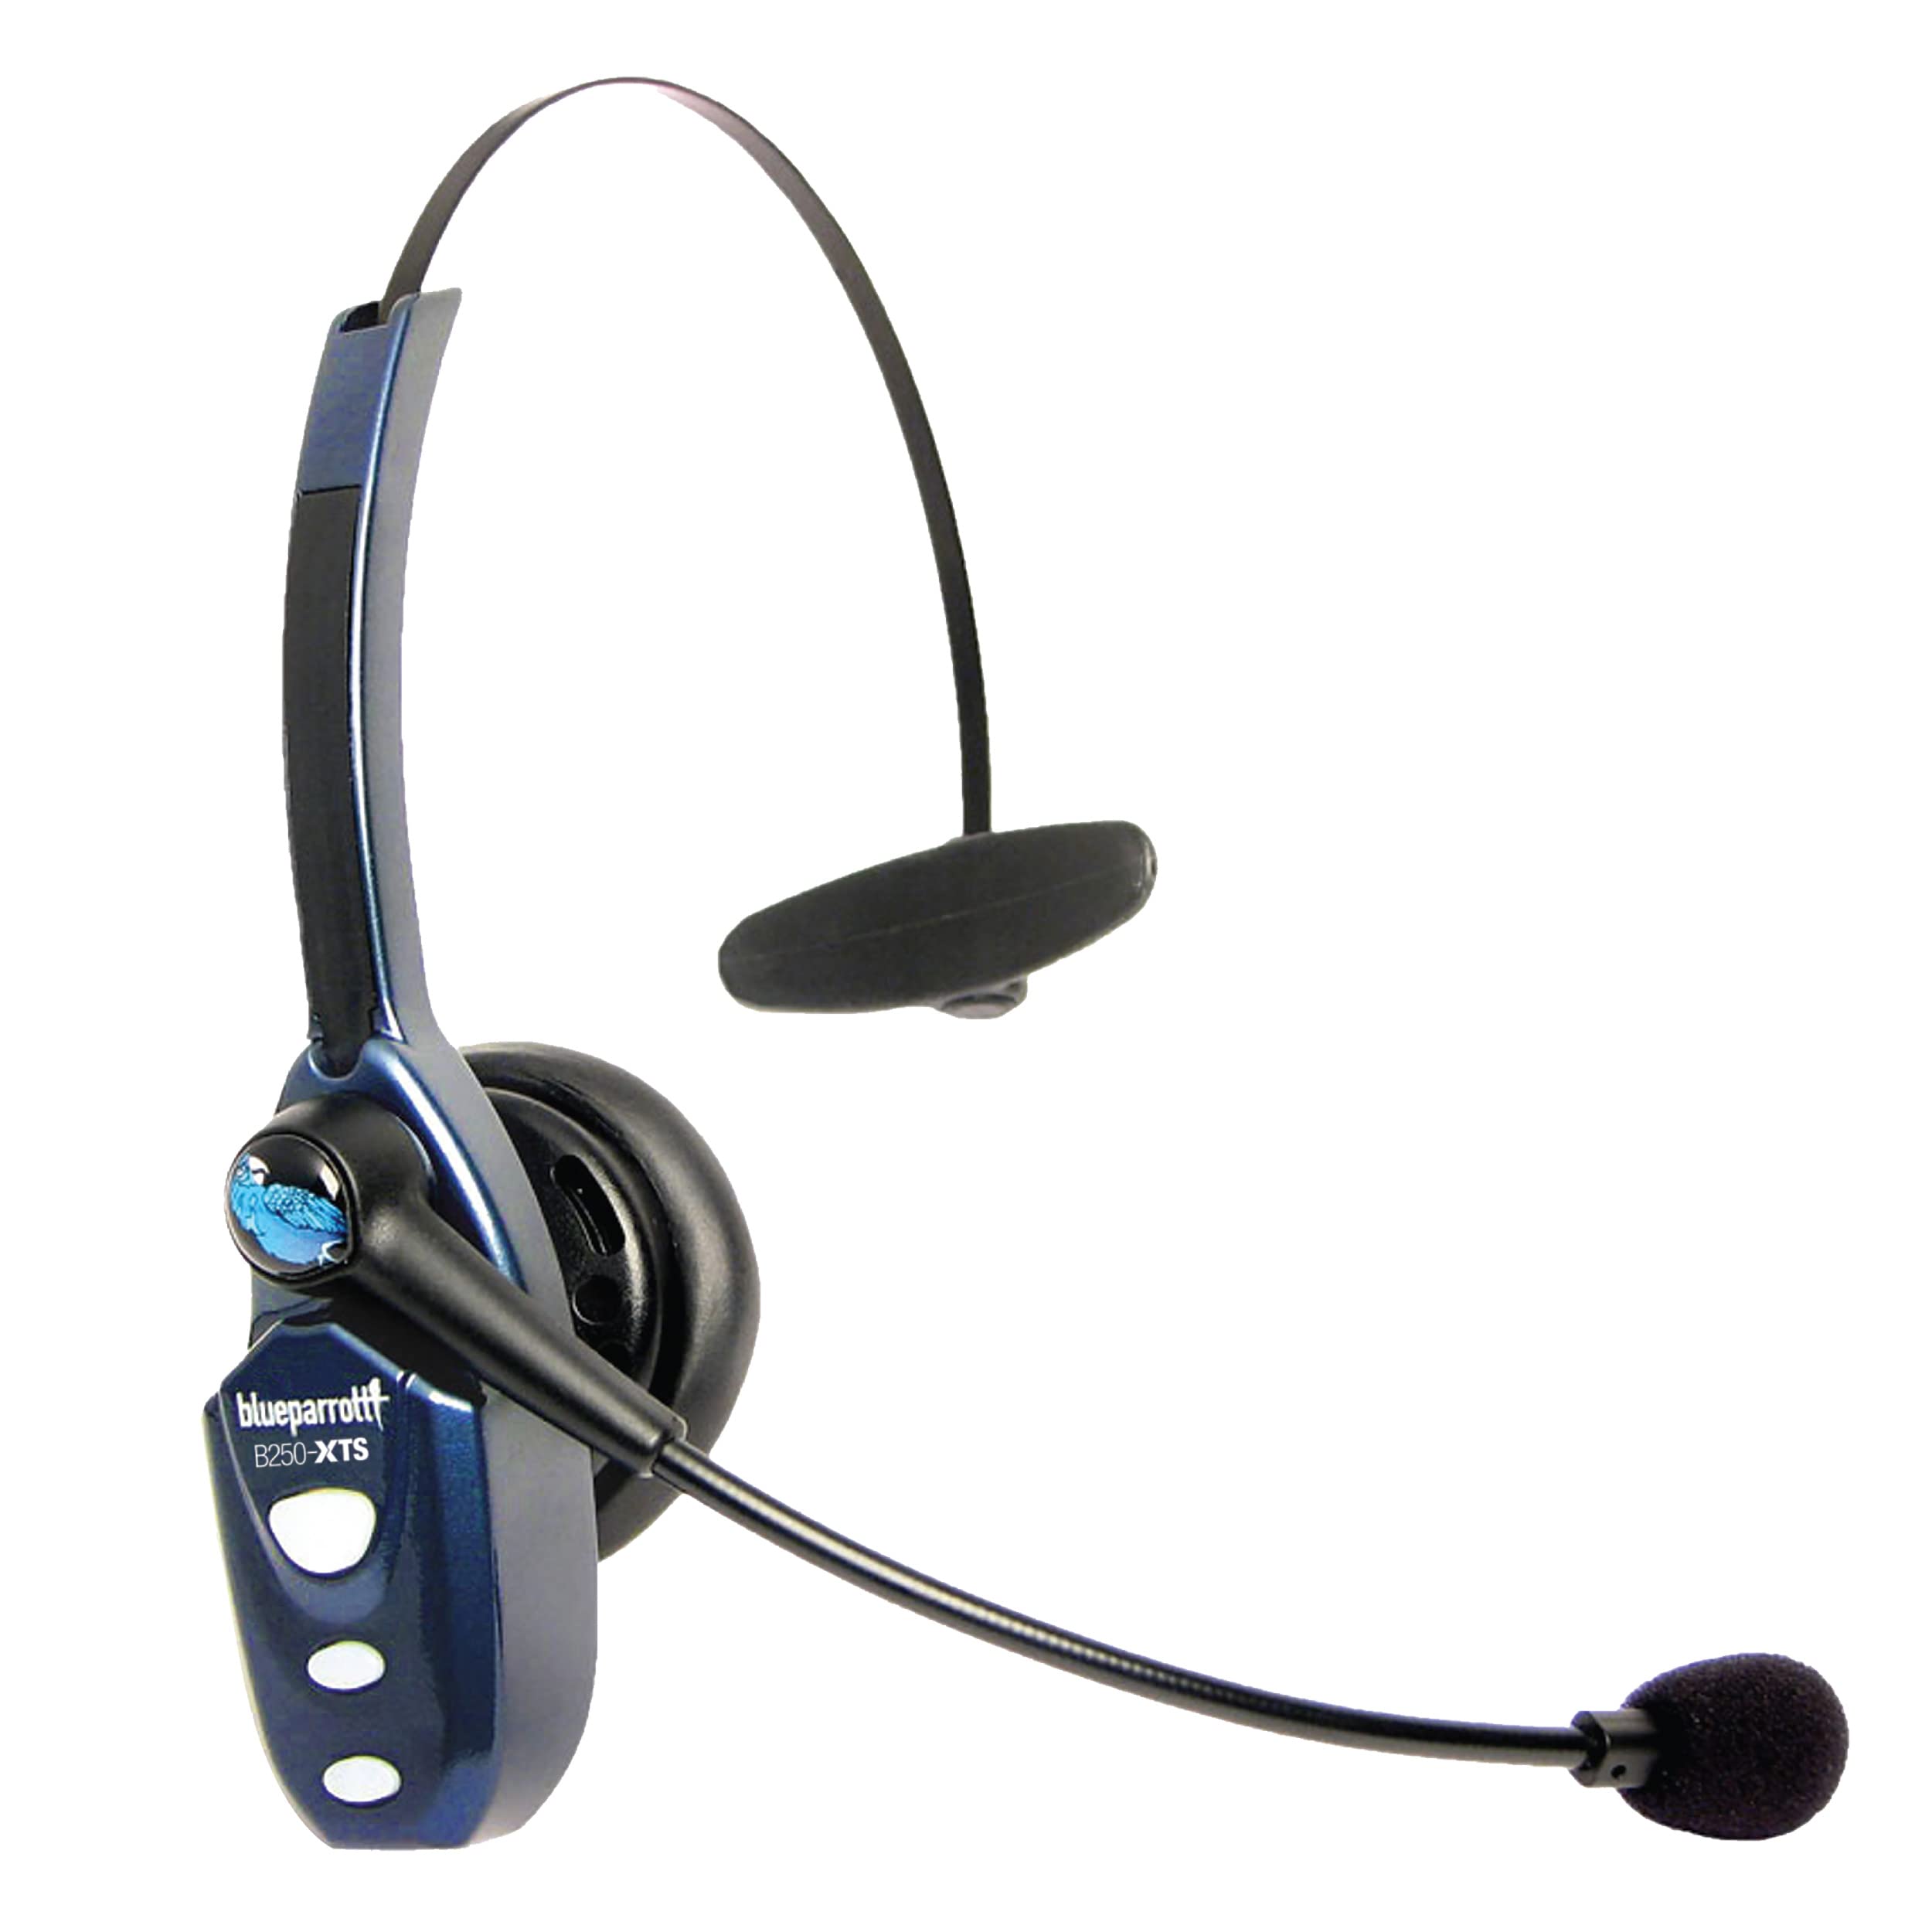 BlueParrott B250-XTS Mono Bluetooth Wireless Headset with 91 Noise Cancellation - Ideal for High-Noise Environments - Includ